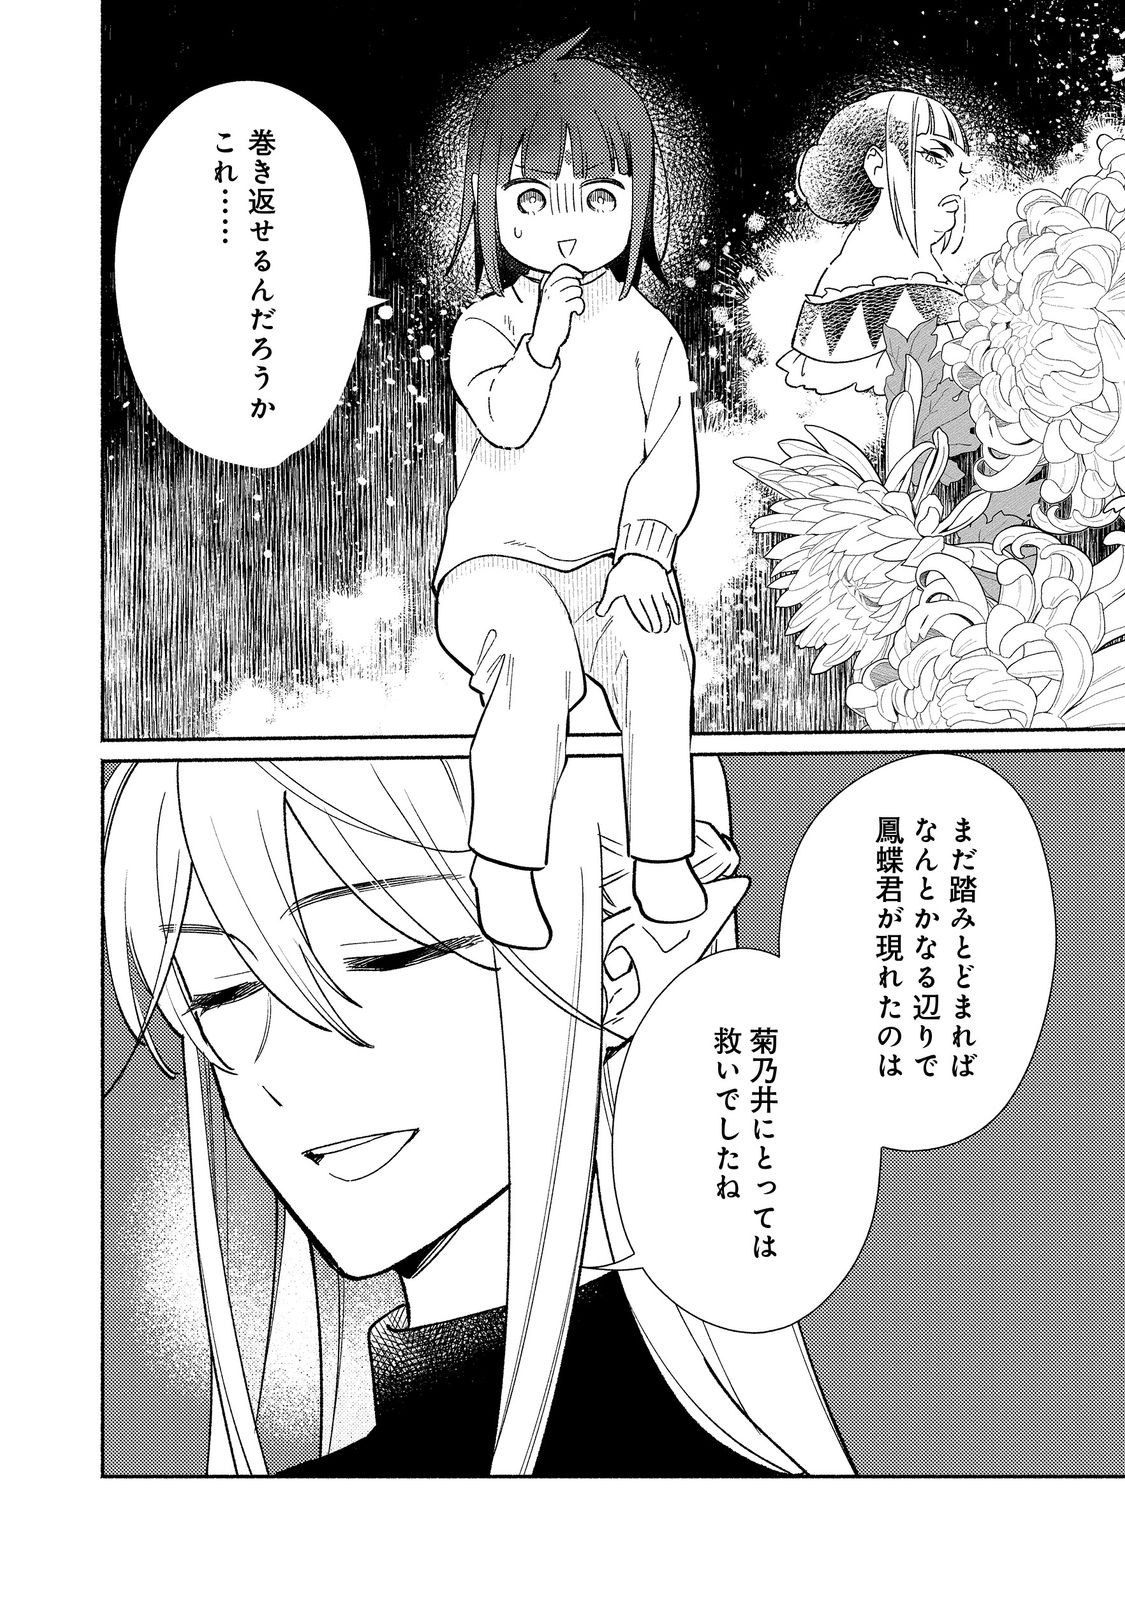 I’m the White Pig Nobleman 第25.1話 - Page 2